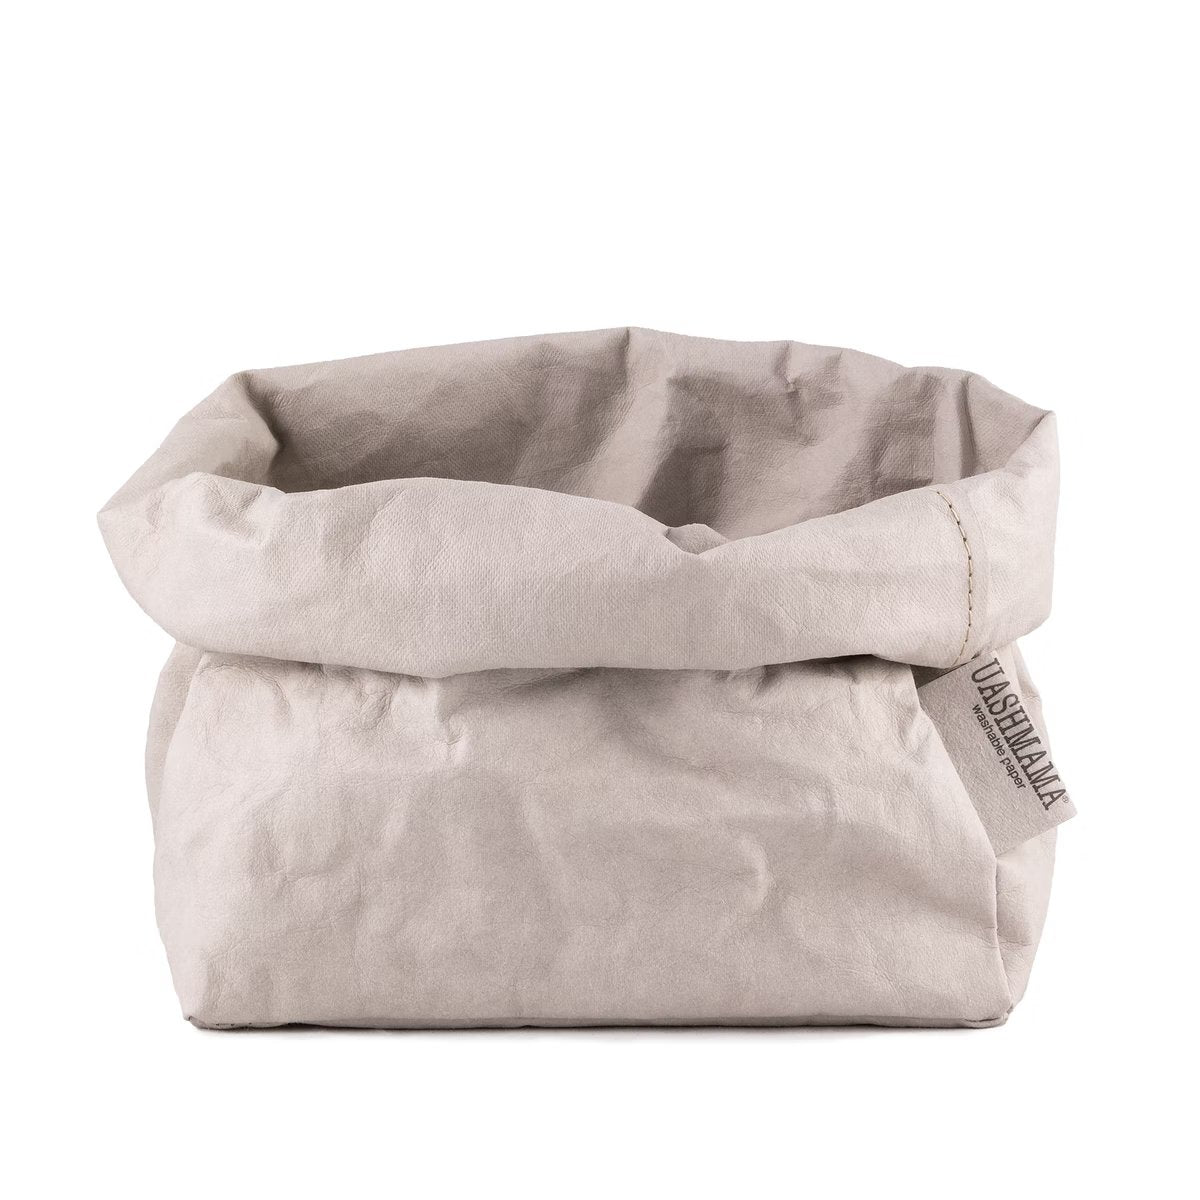 A washable paper bag is shown. The bag is rolled down at the top and features a UASHMAMA logo label on the bottom left corner. The bag pictured is the large size in pale grey.